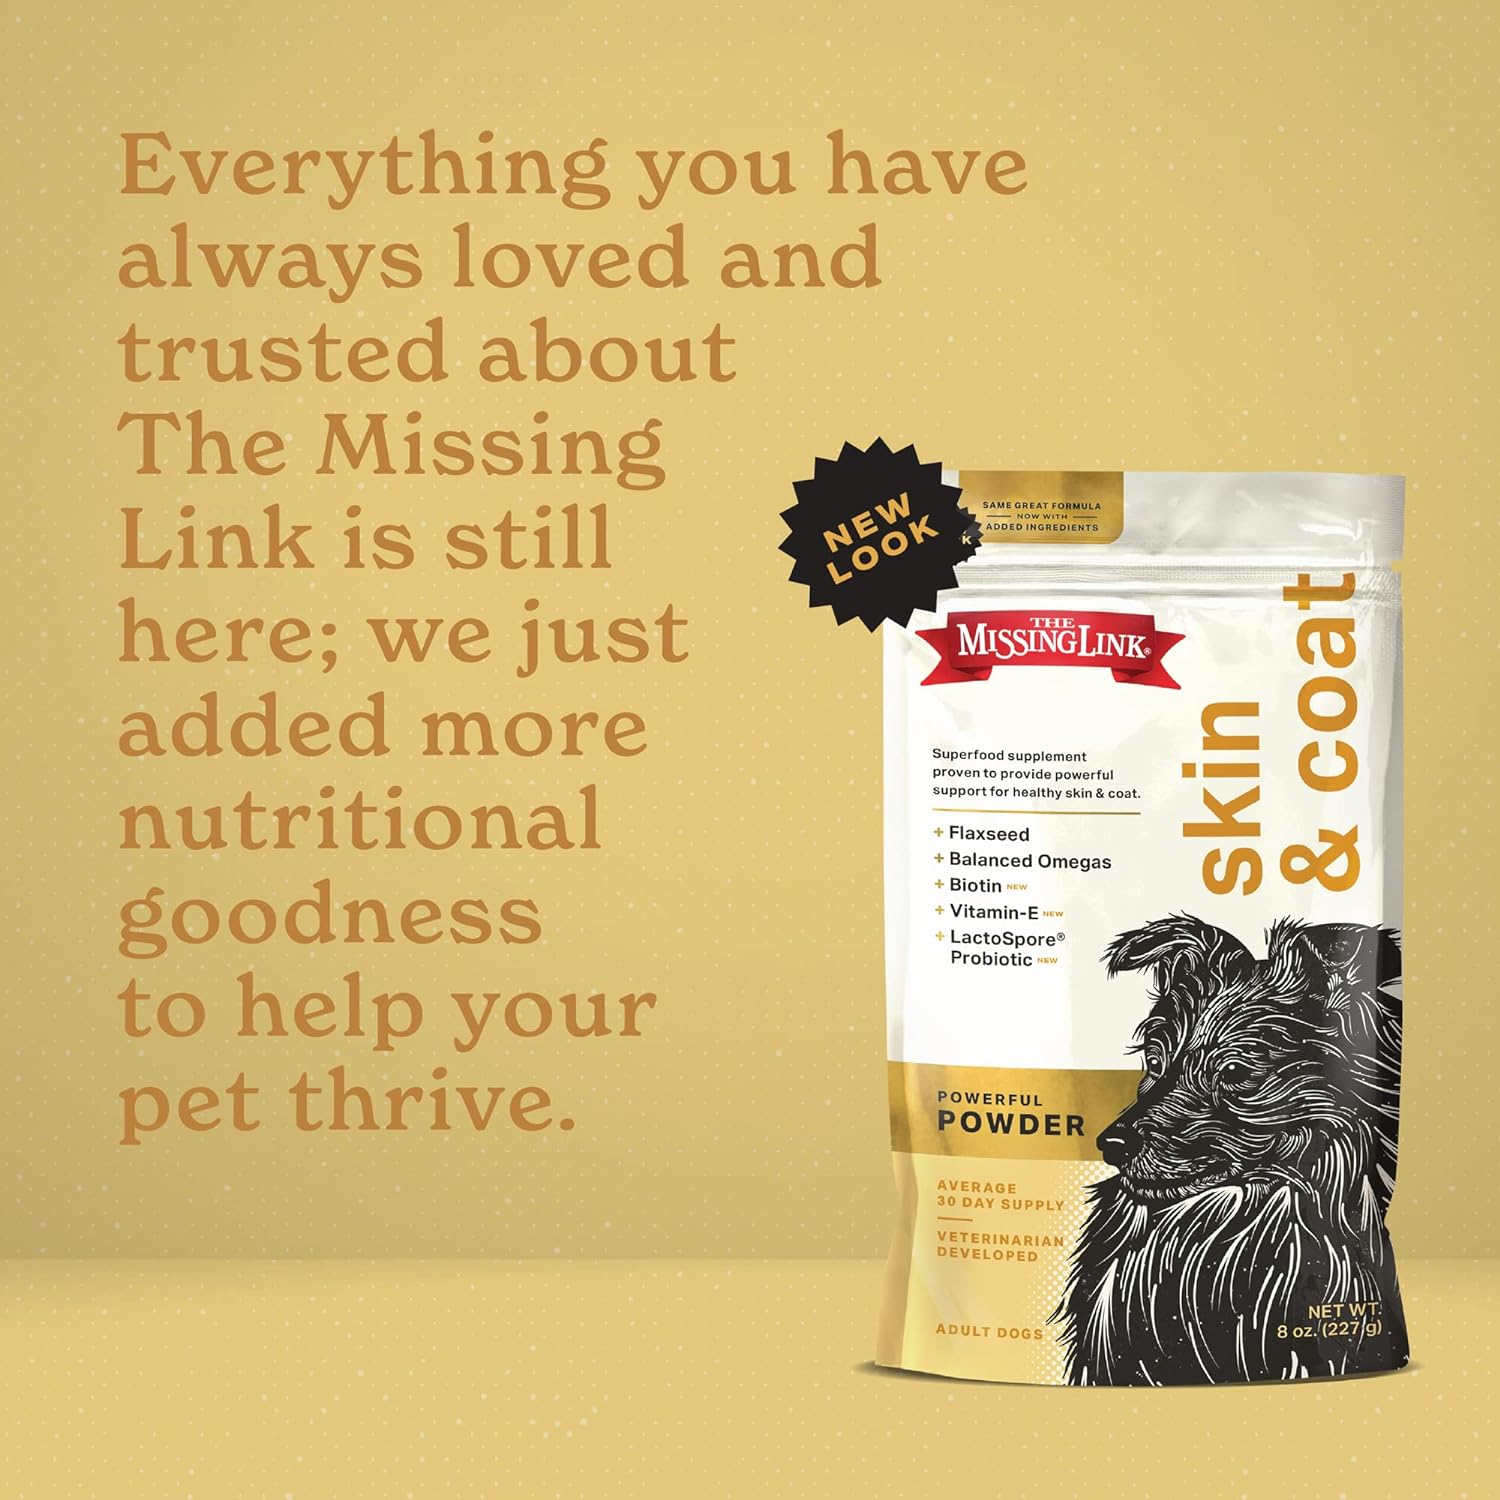 The Missing Link Skin & Coat + Probiotics Supplement 8oz Bag - Powerful Superfood Powder for Dogs Supports Healthy Skin & Glossy Coat, Promotes Hair Growth : Pet Supplies